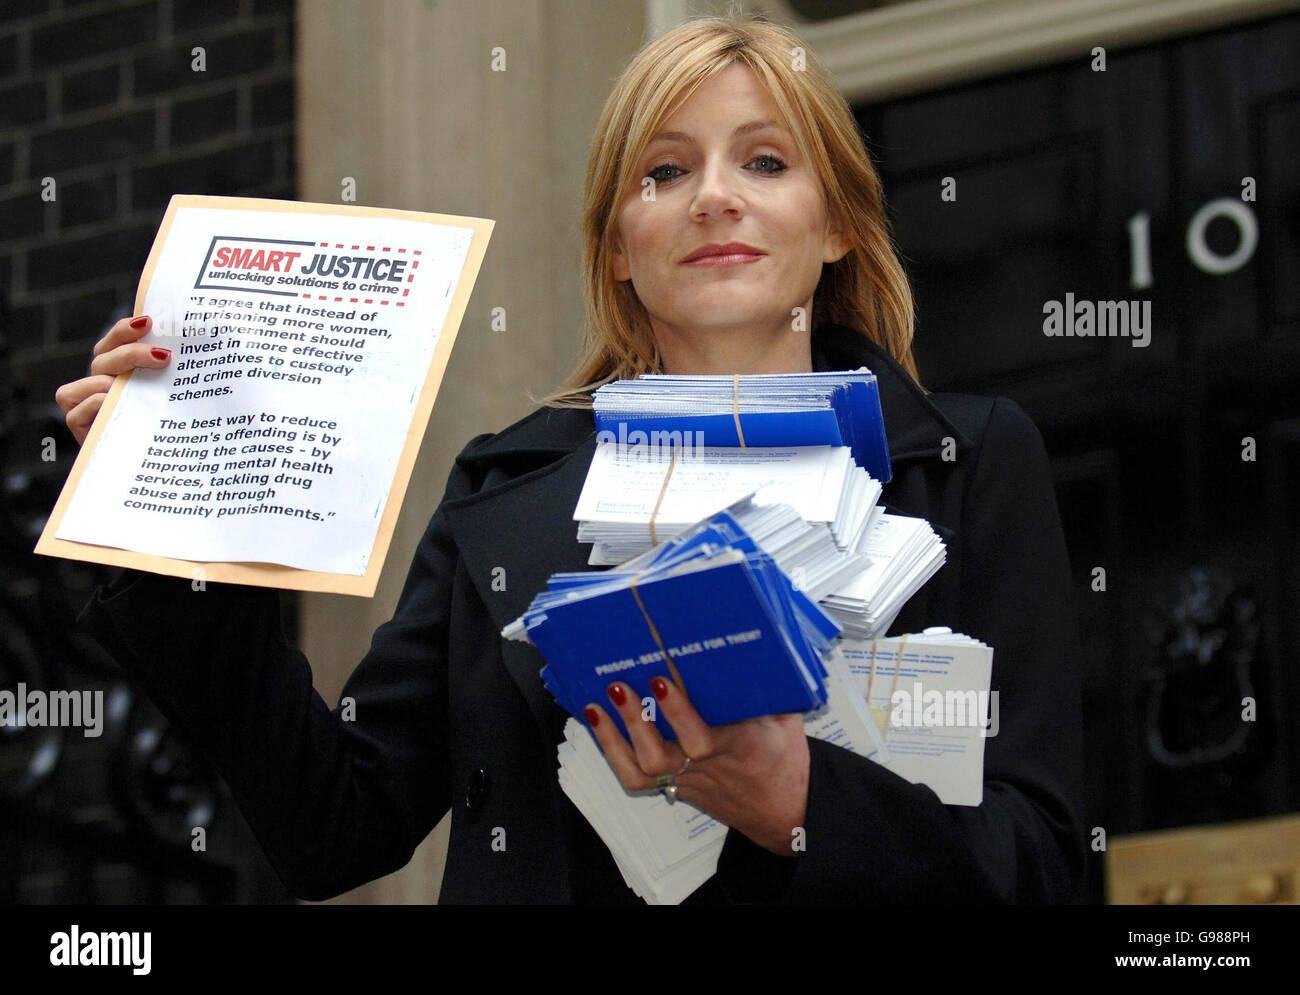 Actress Michelle Collins arrives at 10 Downing Street, London, Monday March 6 2006 with petition cards from Smart Justice. The campaign group is calling on the Government to find alternatives to prison - such as mental health treatment and drug rehabilitation programmes - for vulnerable women convicted of non-violent offences. Watch for PA story. PRESS ASSOCIATION photo. Picture credit should read: Fiona Hanson/PA. Stock Photo